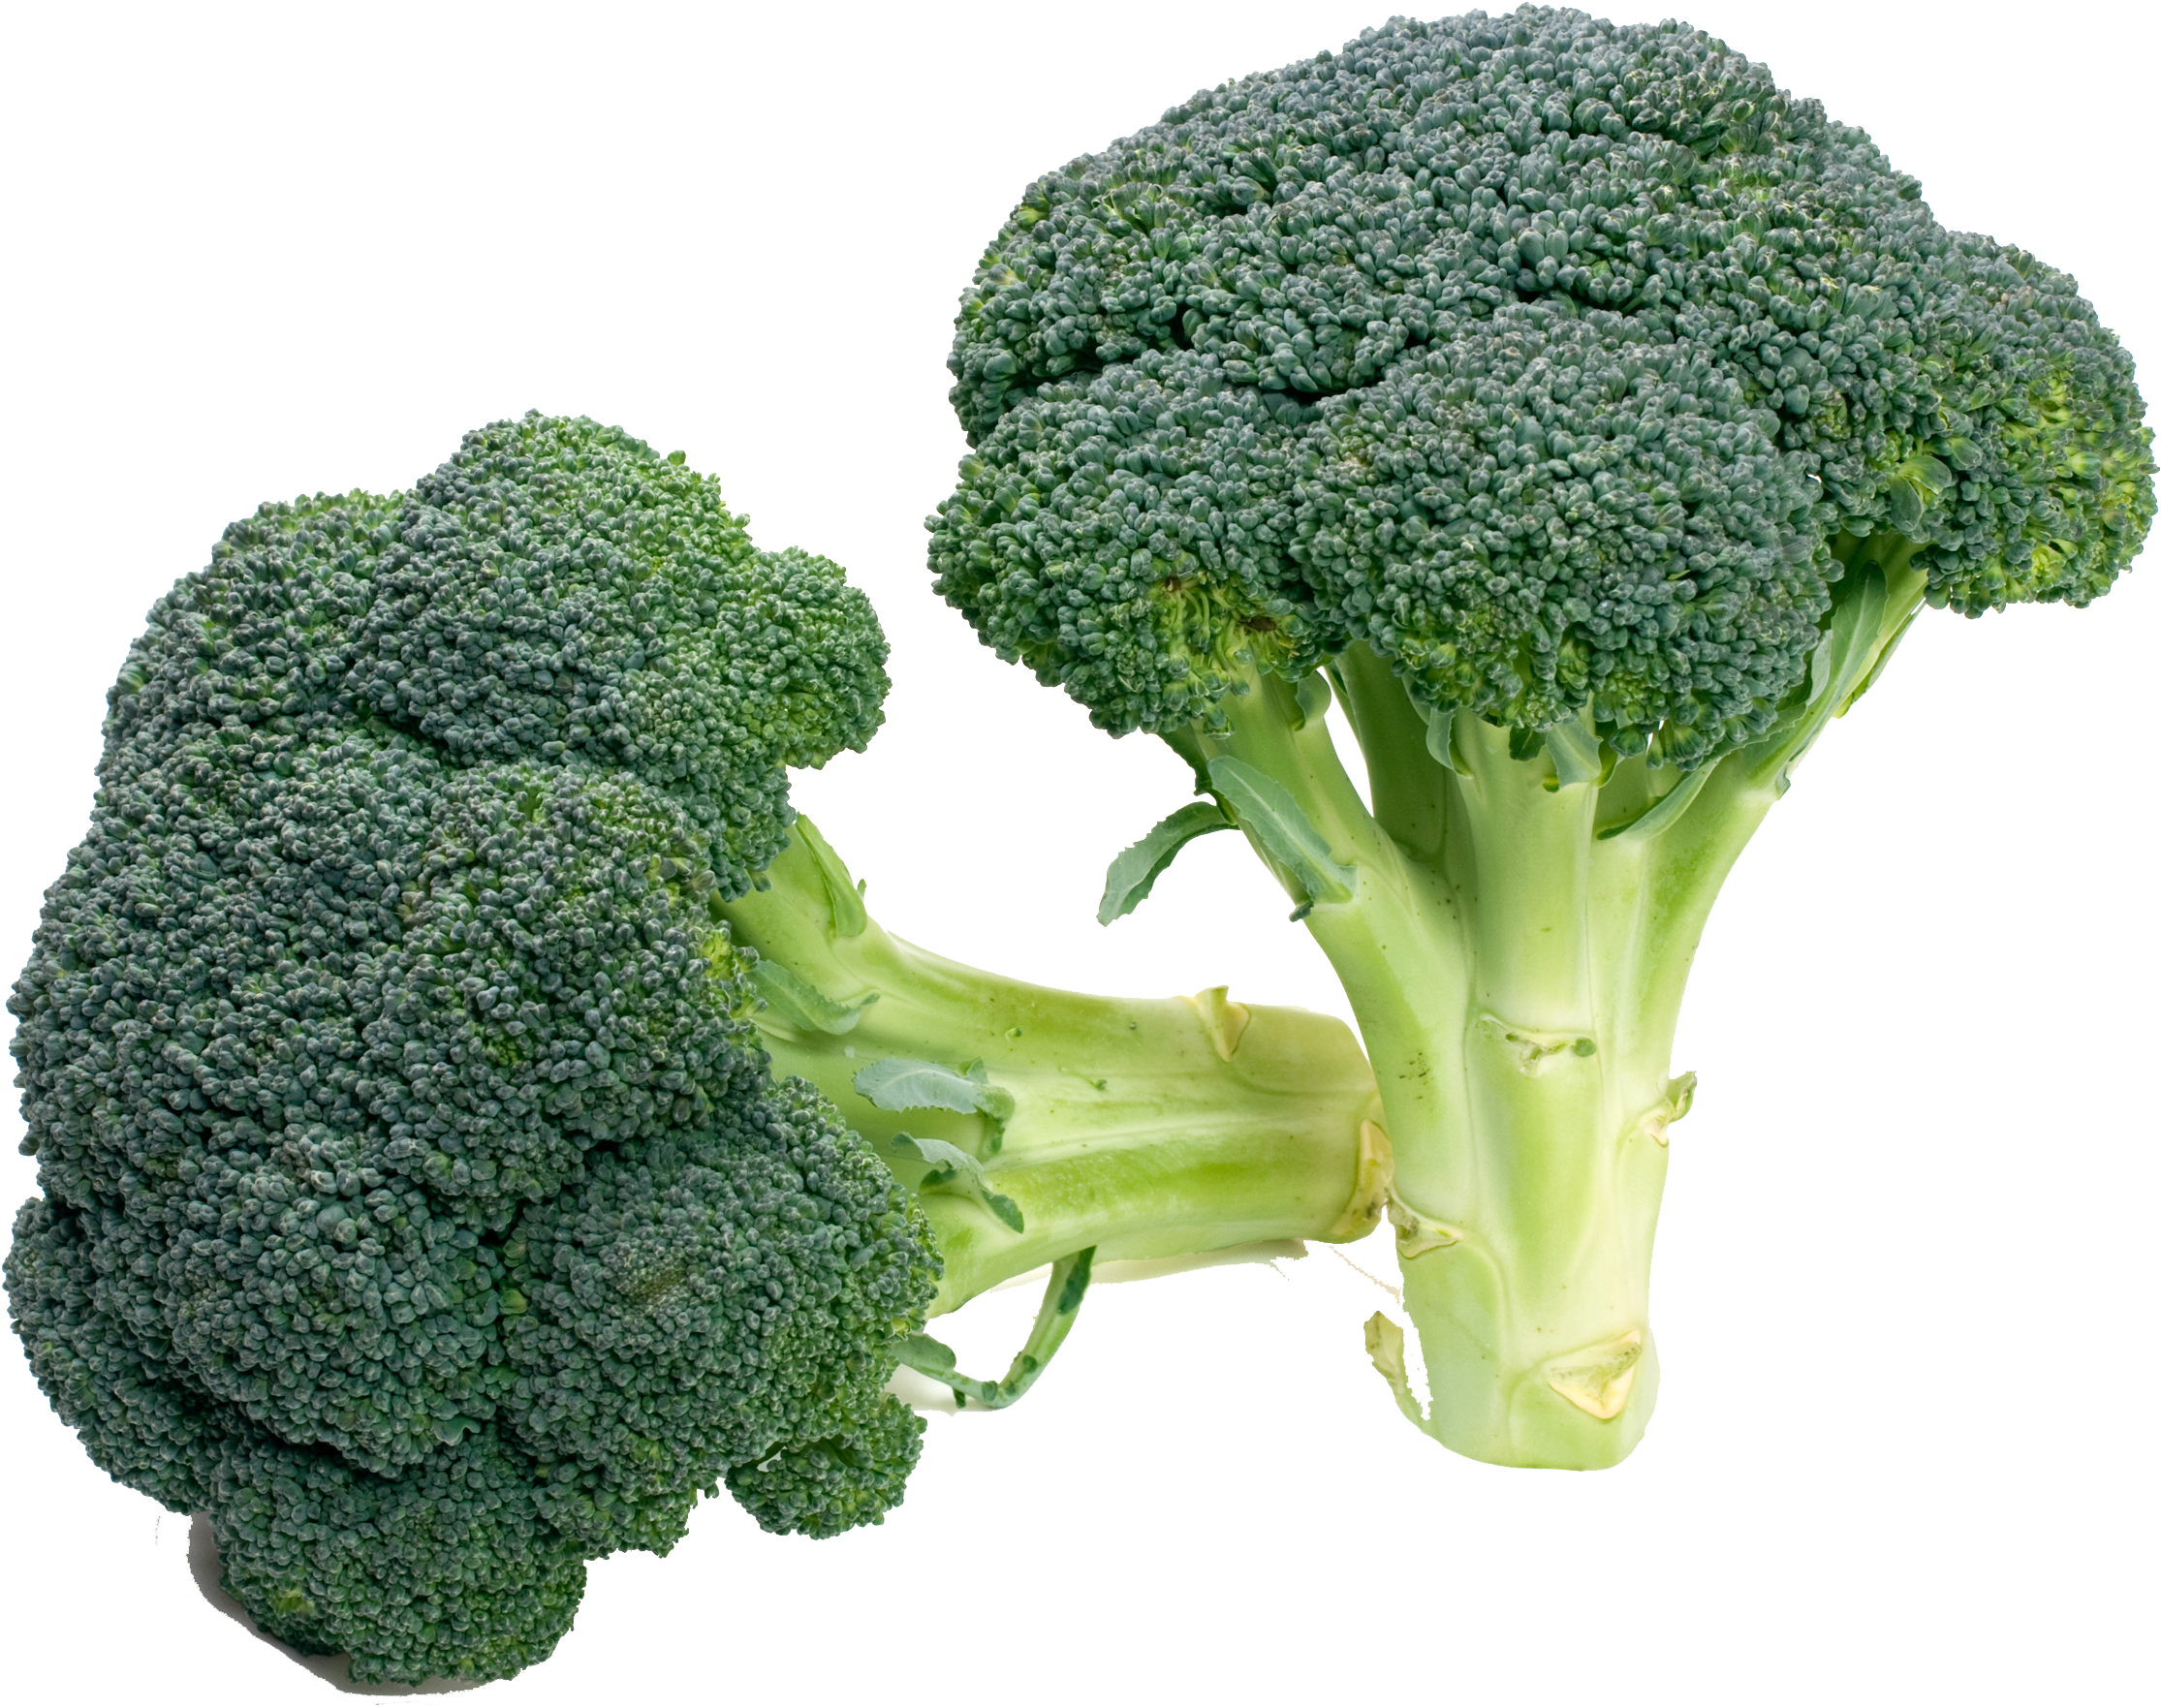 Clip Royalty Free Download Broccoli Vegetable Food Sprouting